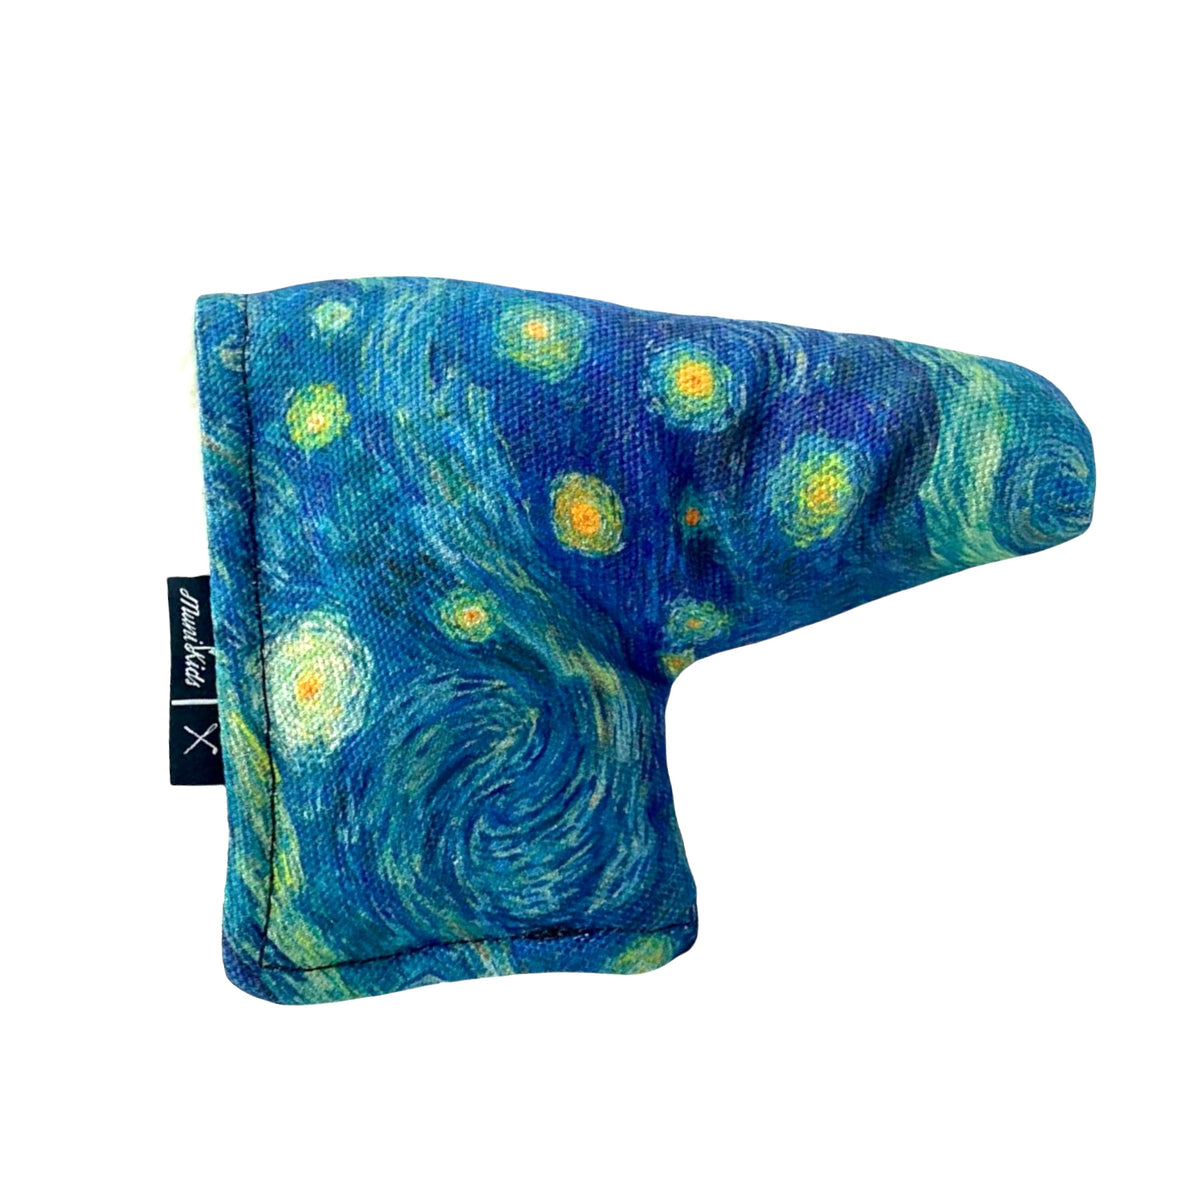 Starry putter headcover